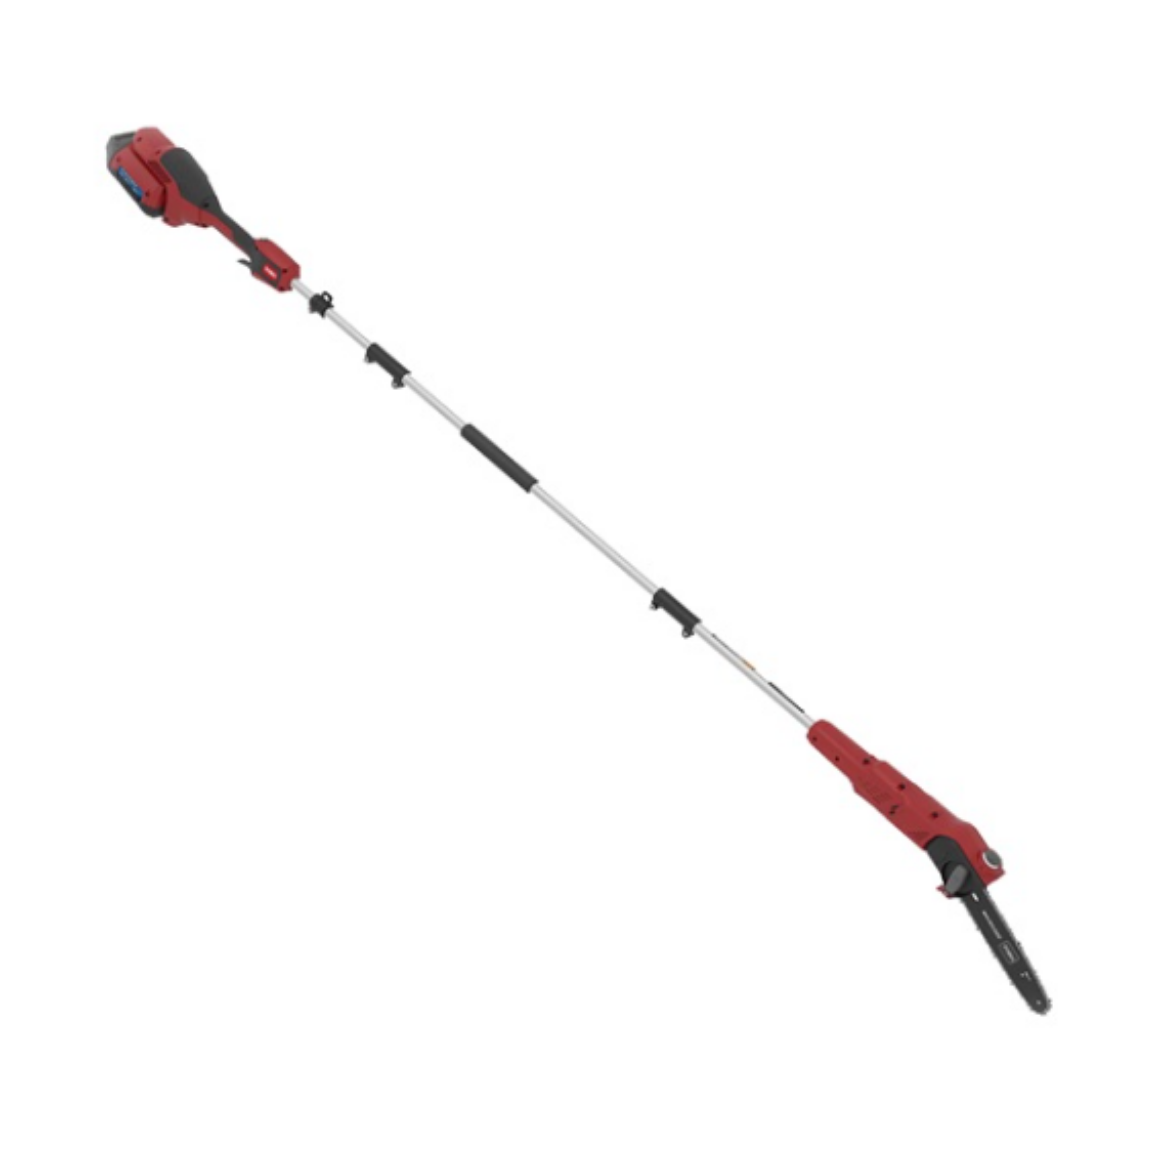 Picture of Toro 60V Pole Saw - Skin